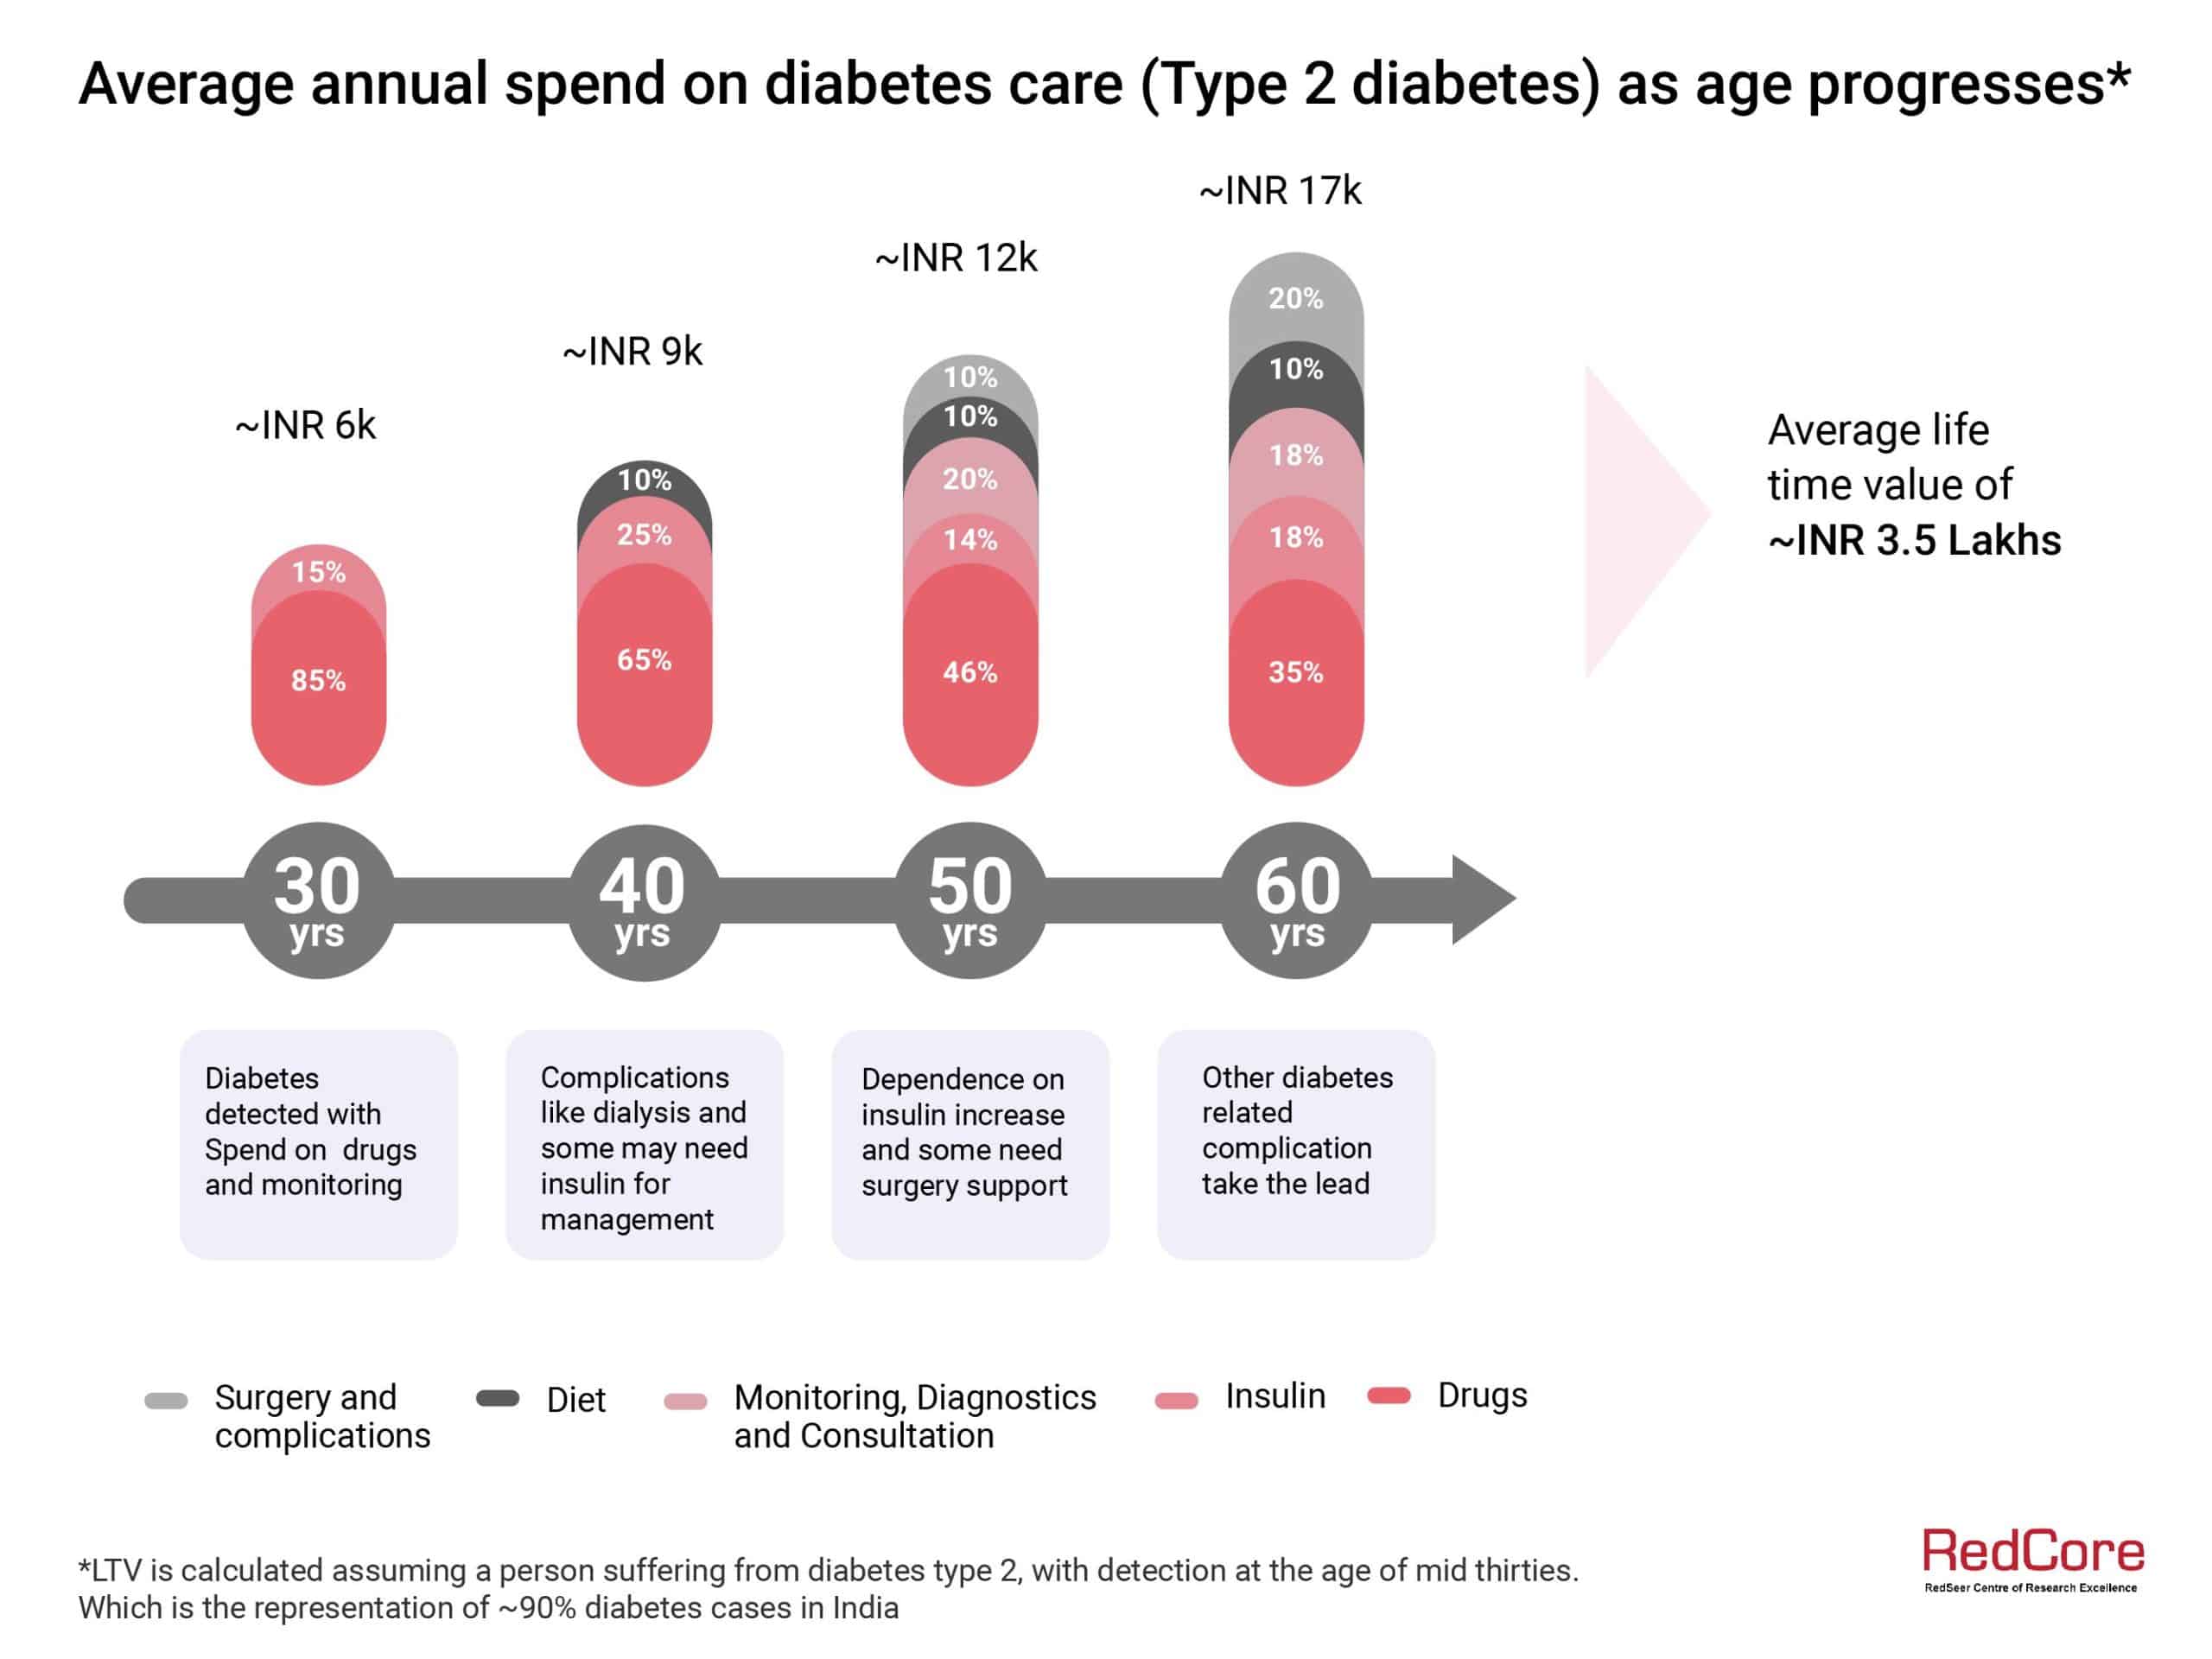 Average Annual spend on Diabetes care as age progresses